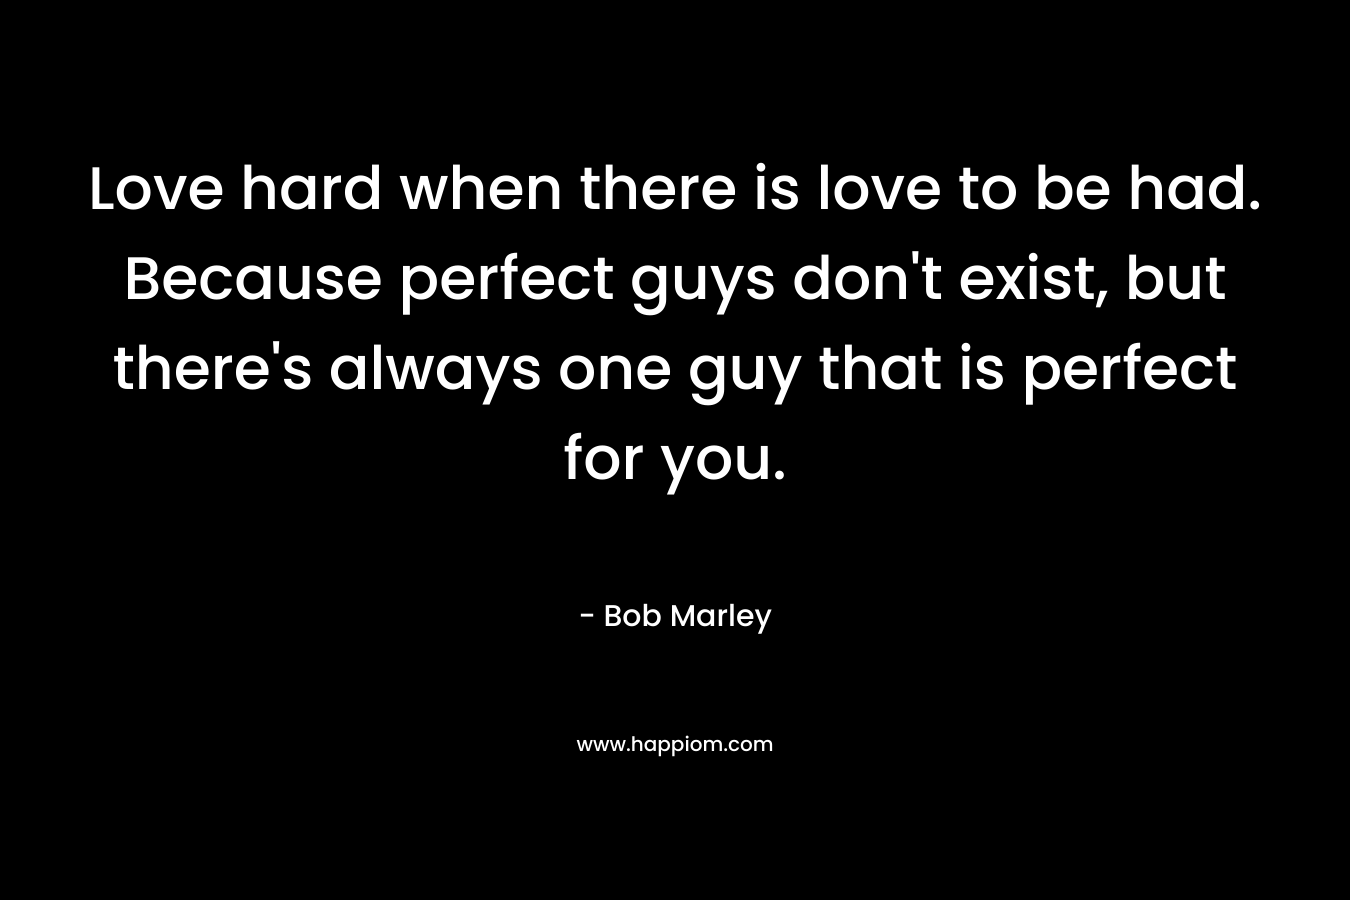 Love hard when there is love to be had. Because perfect guys don’t exist, but there’s always one guy that is perfect for you. – Bob Marley